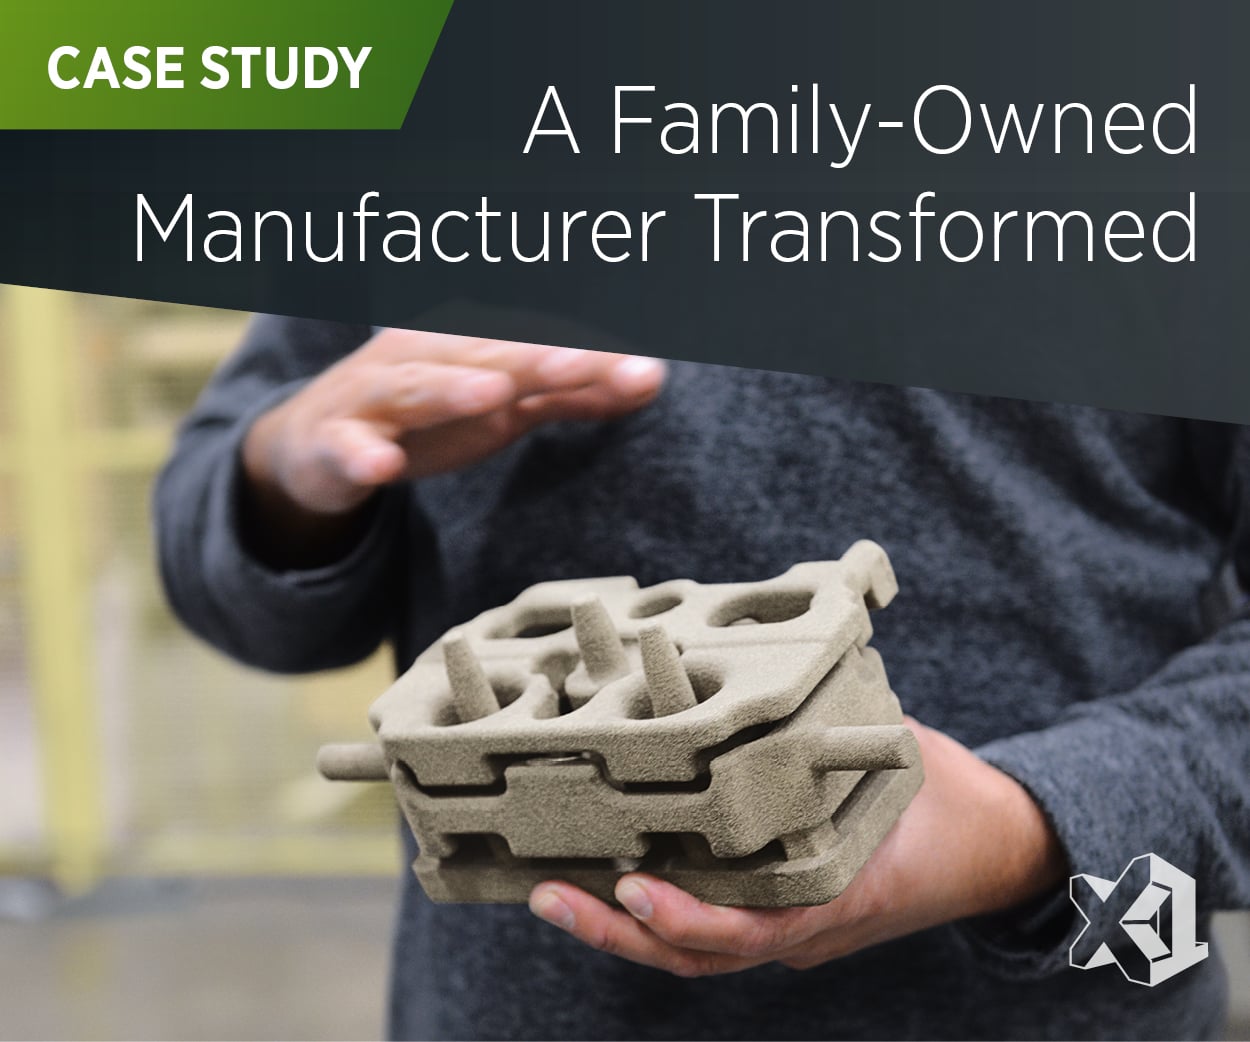 How Sand 3D Printing Transformed a Family-Owned Manufacturer